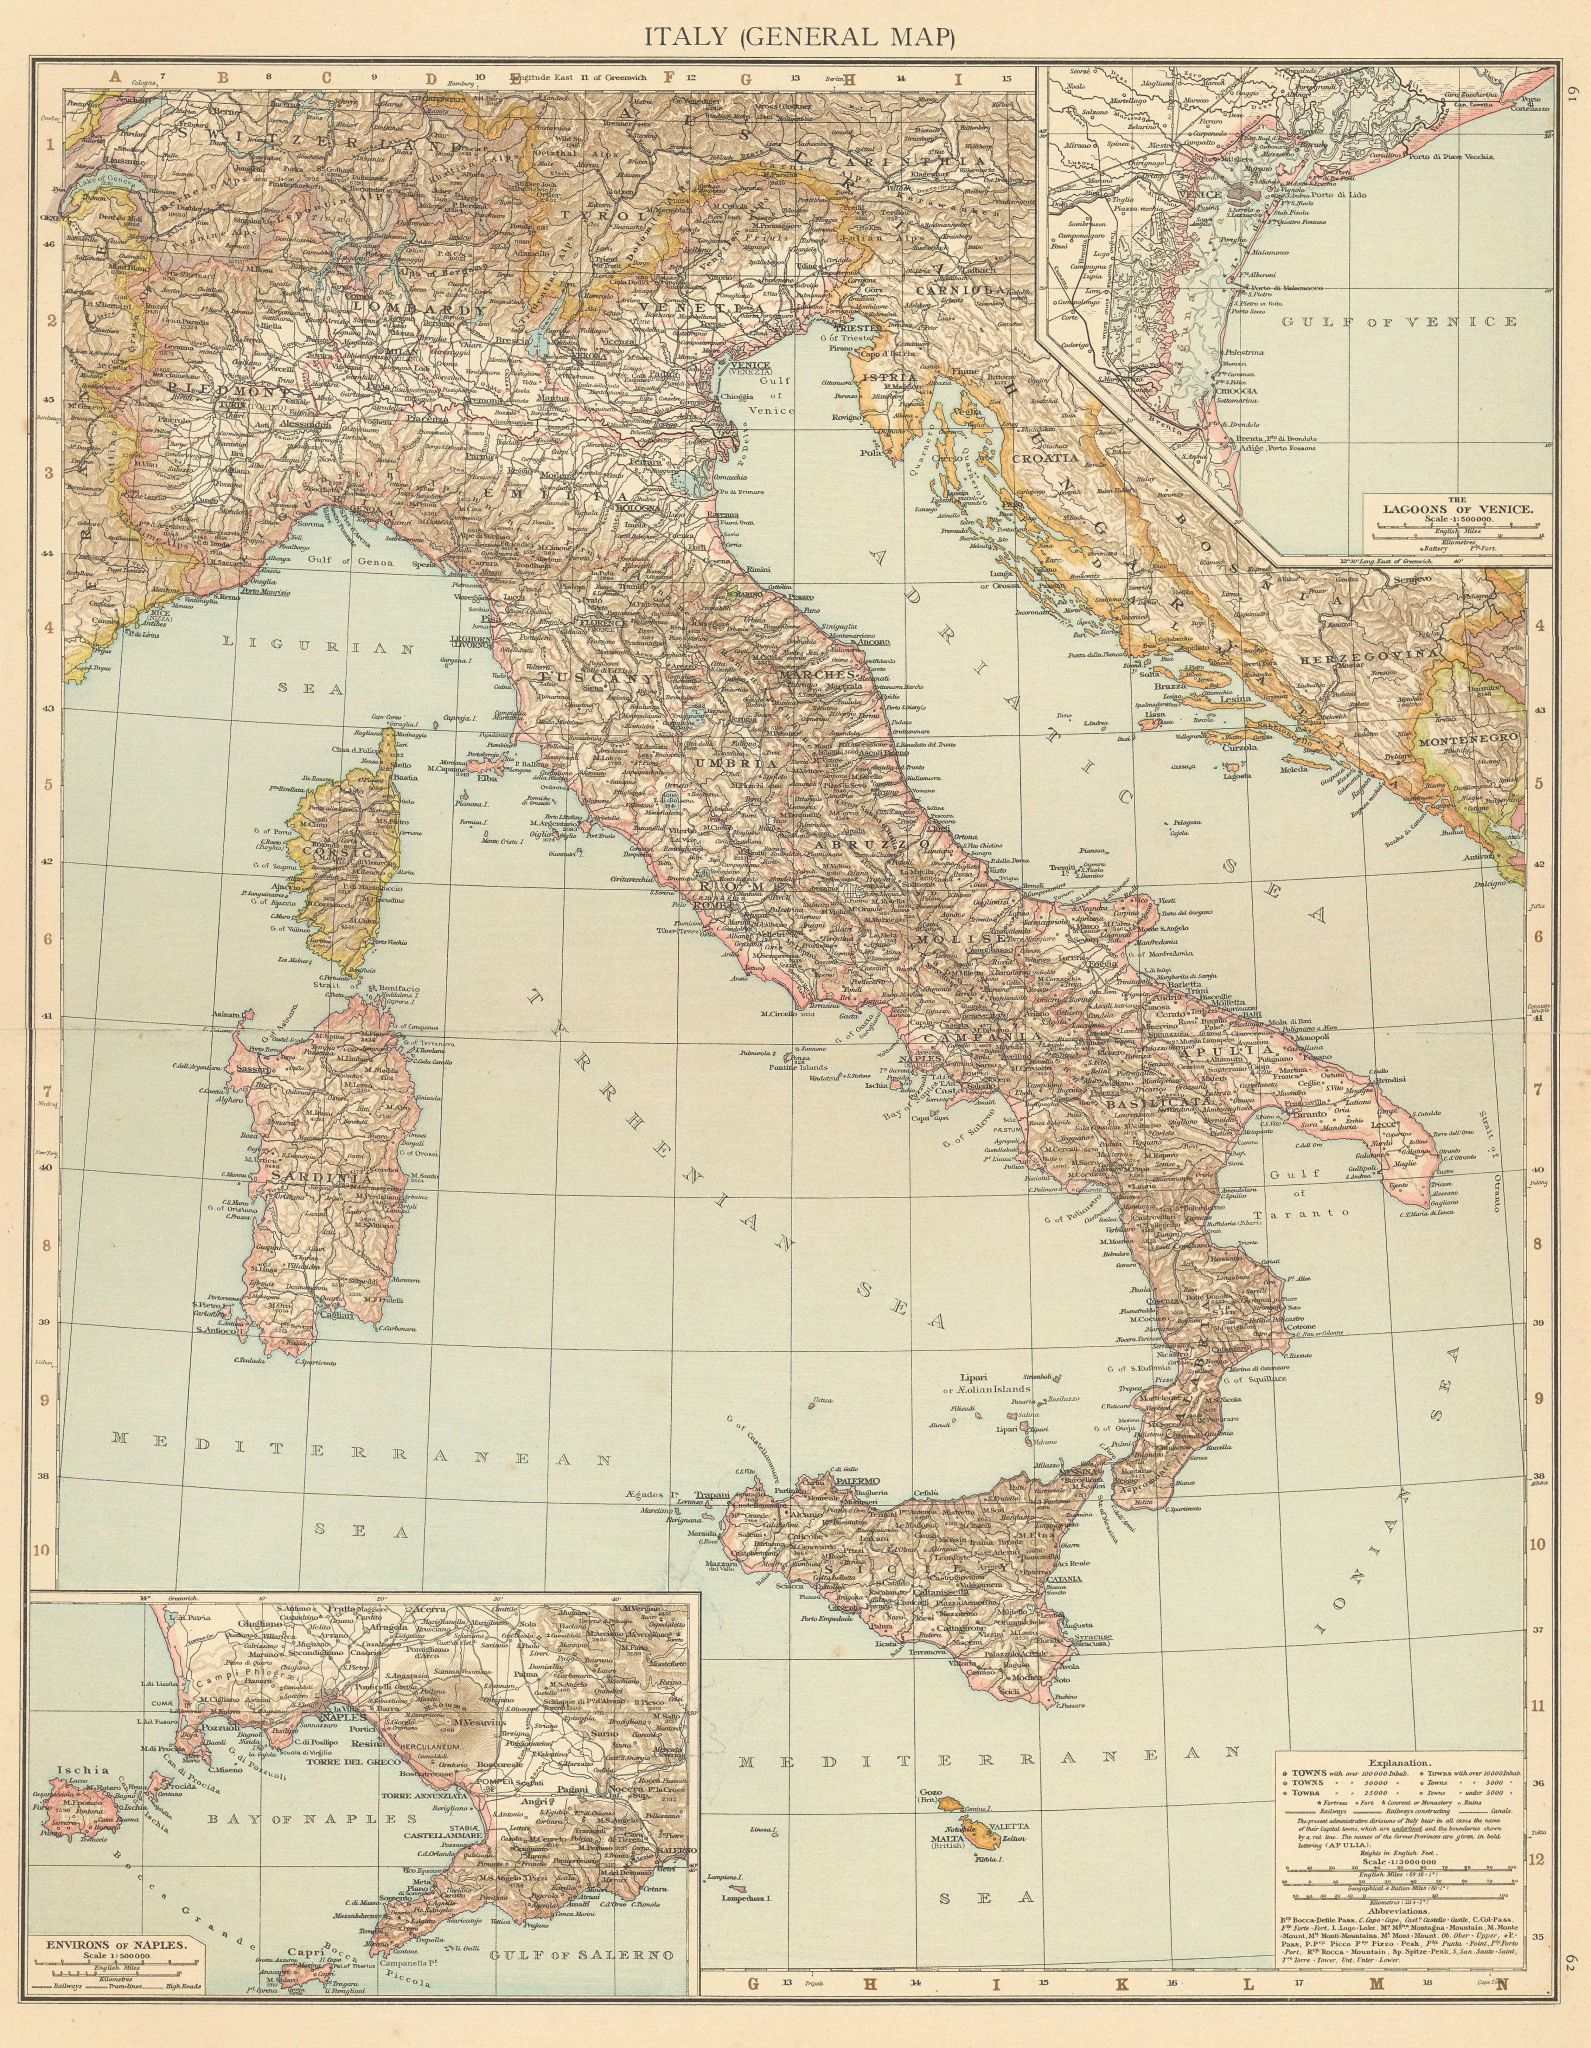 Associate Product Italy (general map). Lagoons of Venice. Environs of Naples. THE TIMES 1895